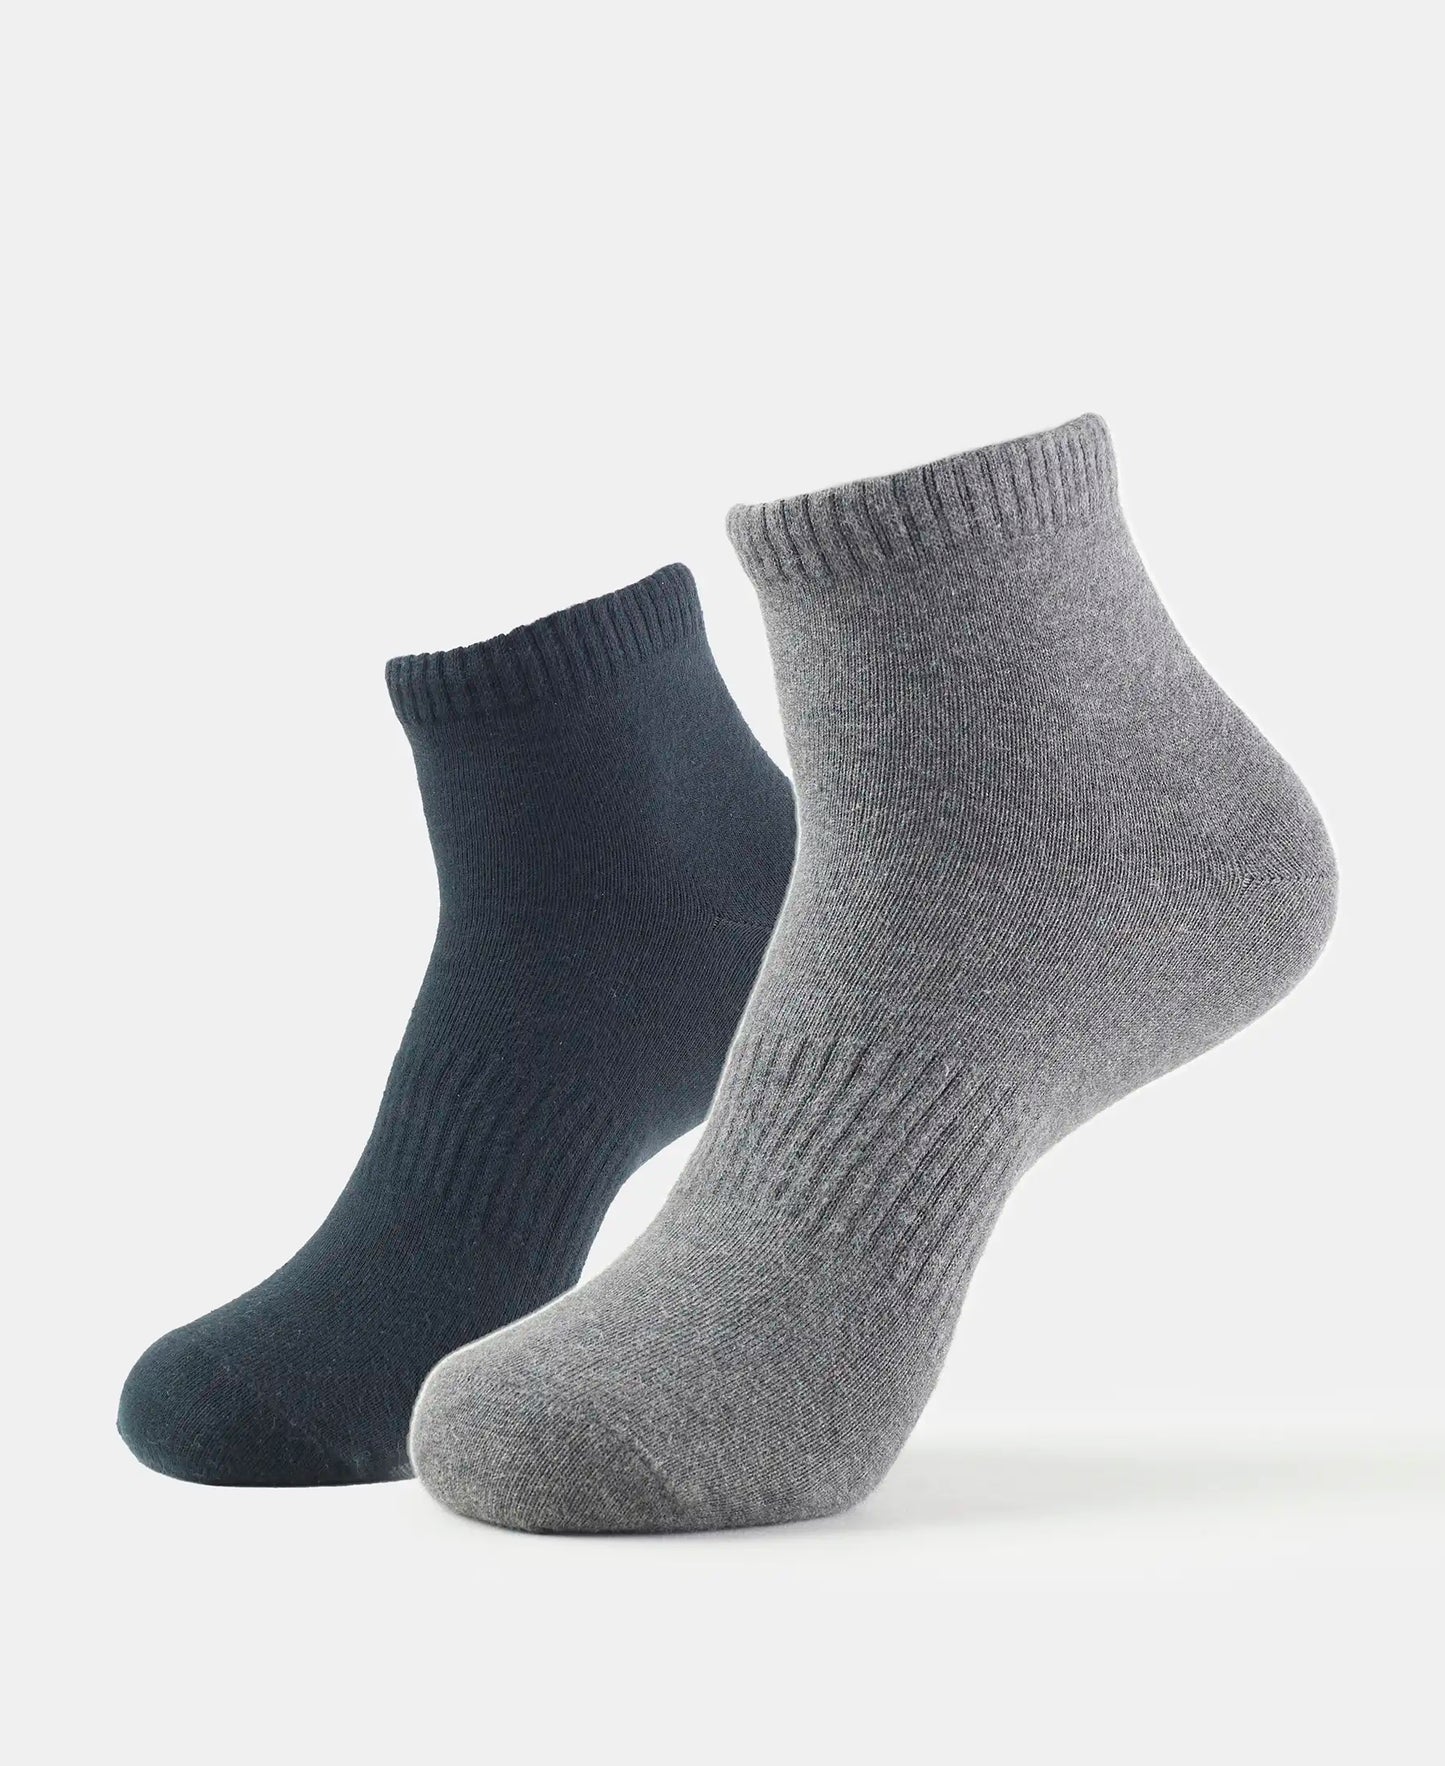 Compact Cotton Elastane Stretch Ankle Length Socks With StayFresh Treatment - Black & Charcoal Melange (Pack of 2)